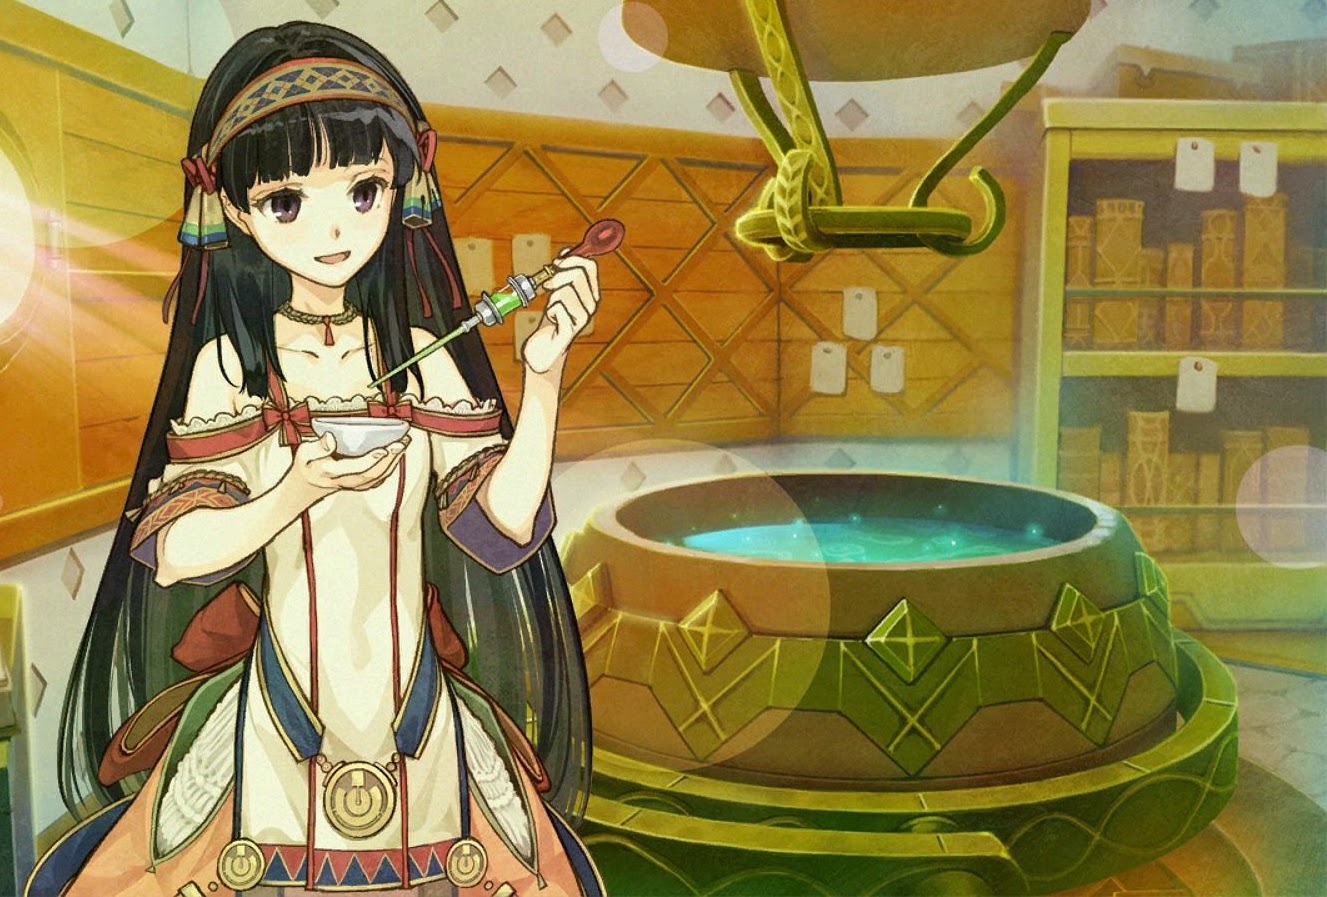 Atelier Shallie review